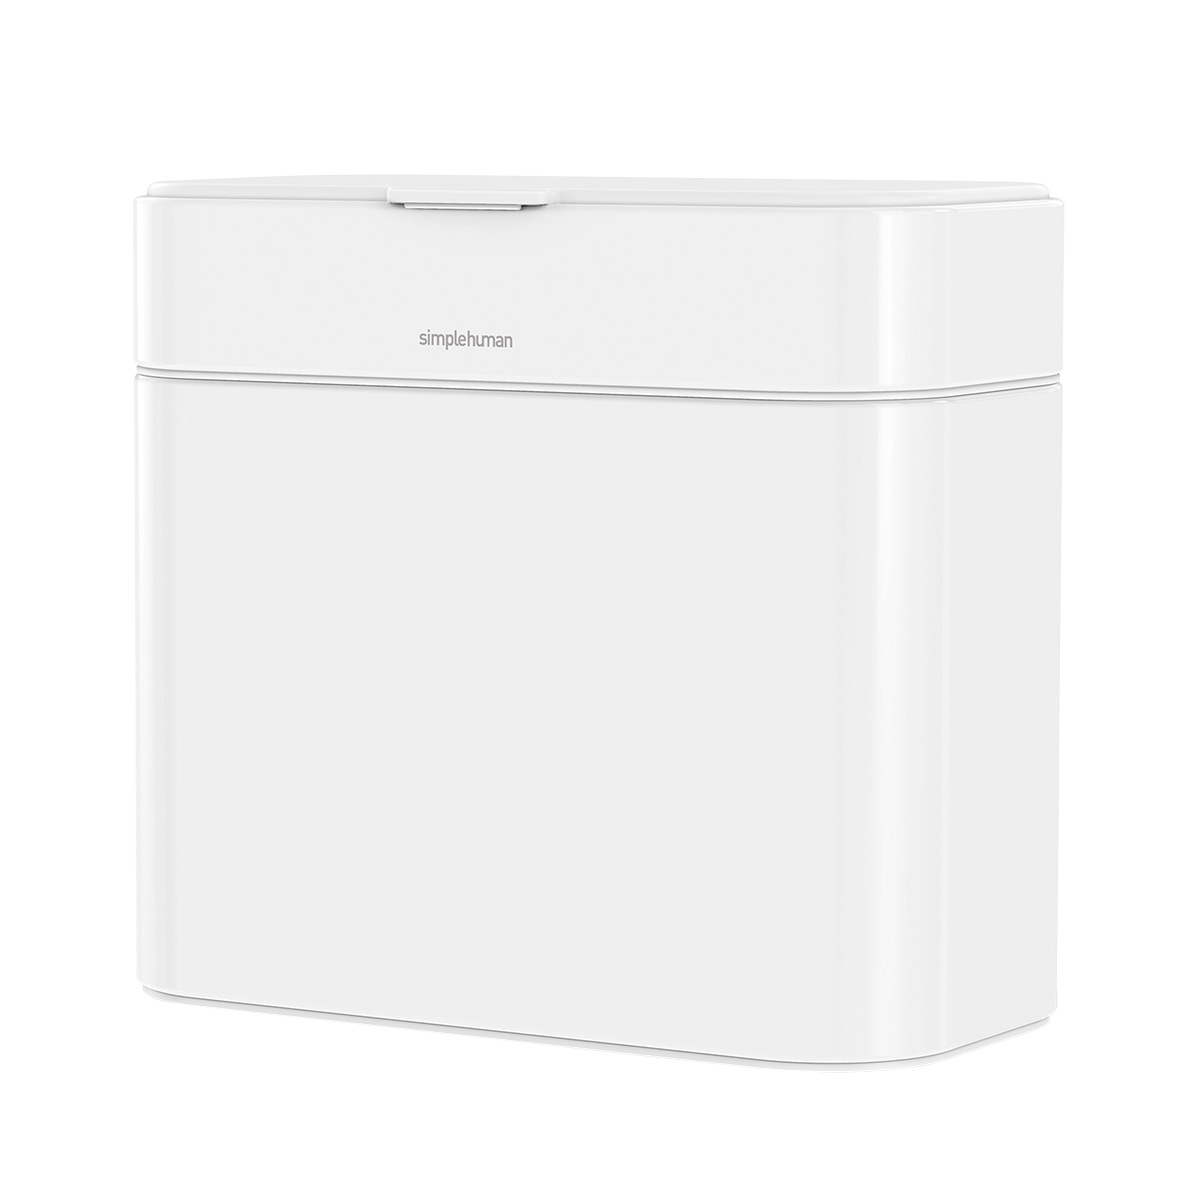 https://www.containerstore.com/catalogimages/479144/10093131-sh-4L-compost-caddy-white-v.jpg